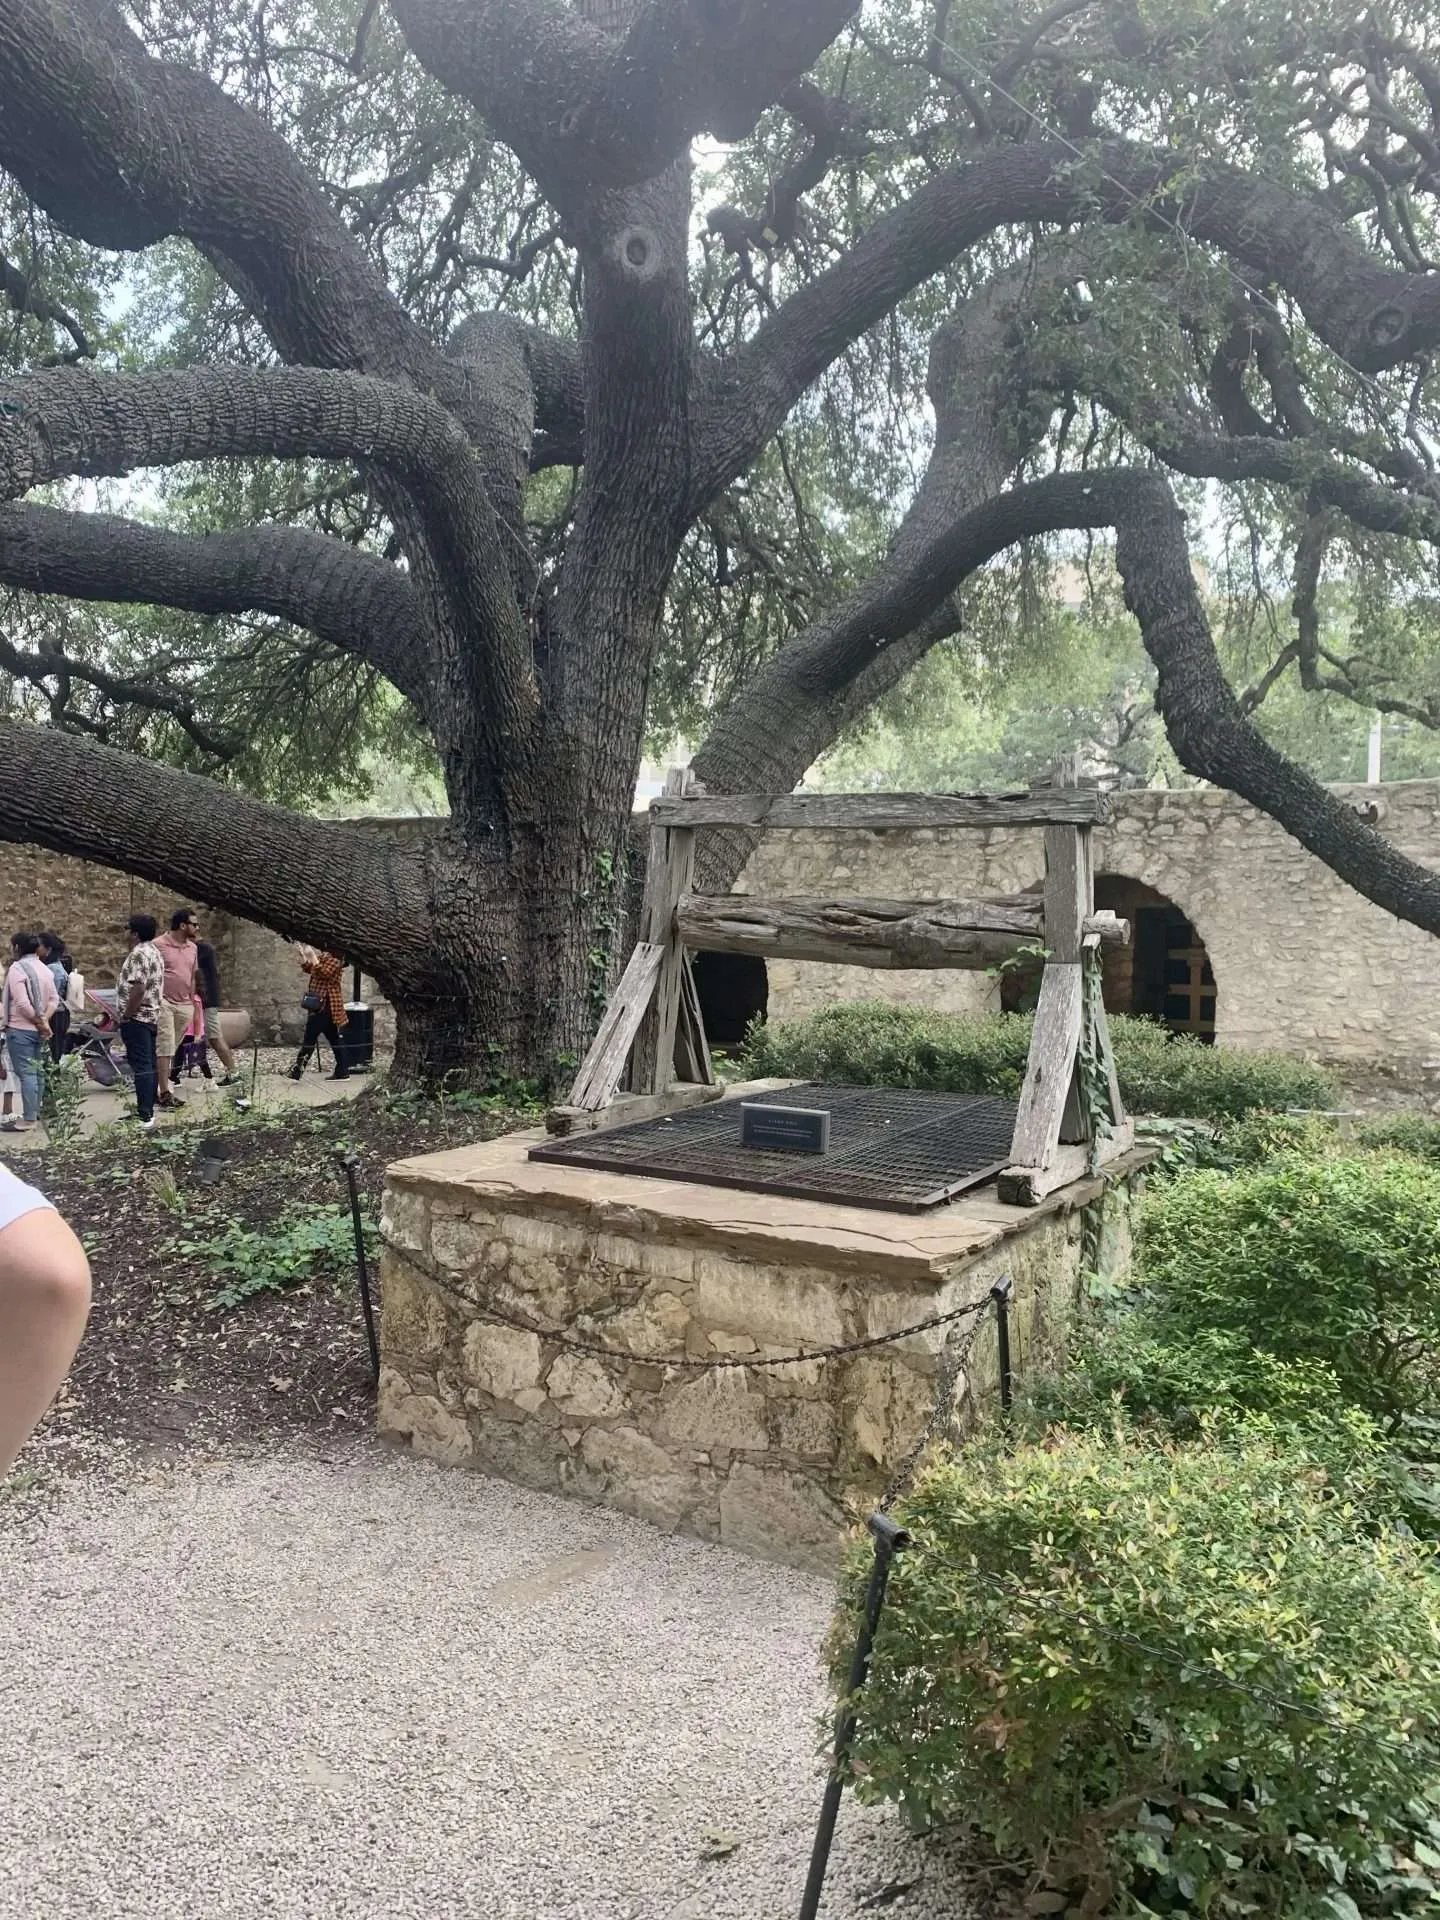 The water well at the Alamo in San Antonio, Texas.